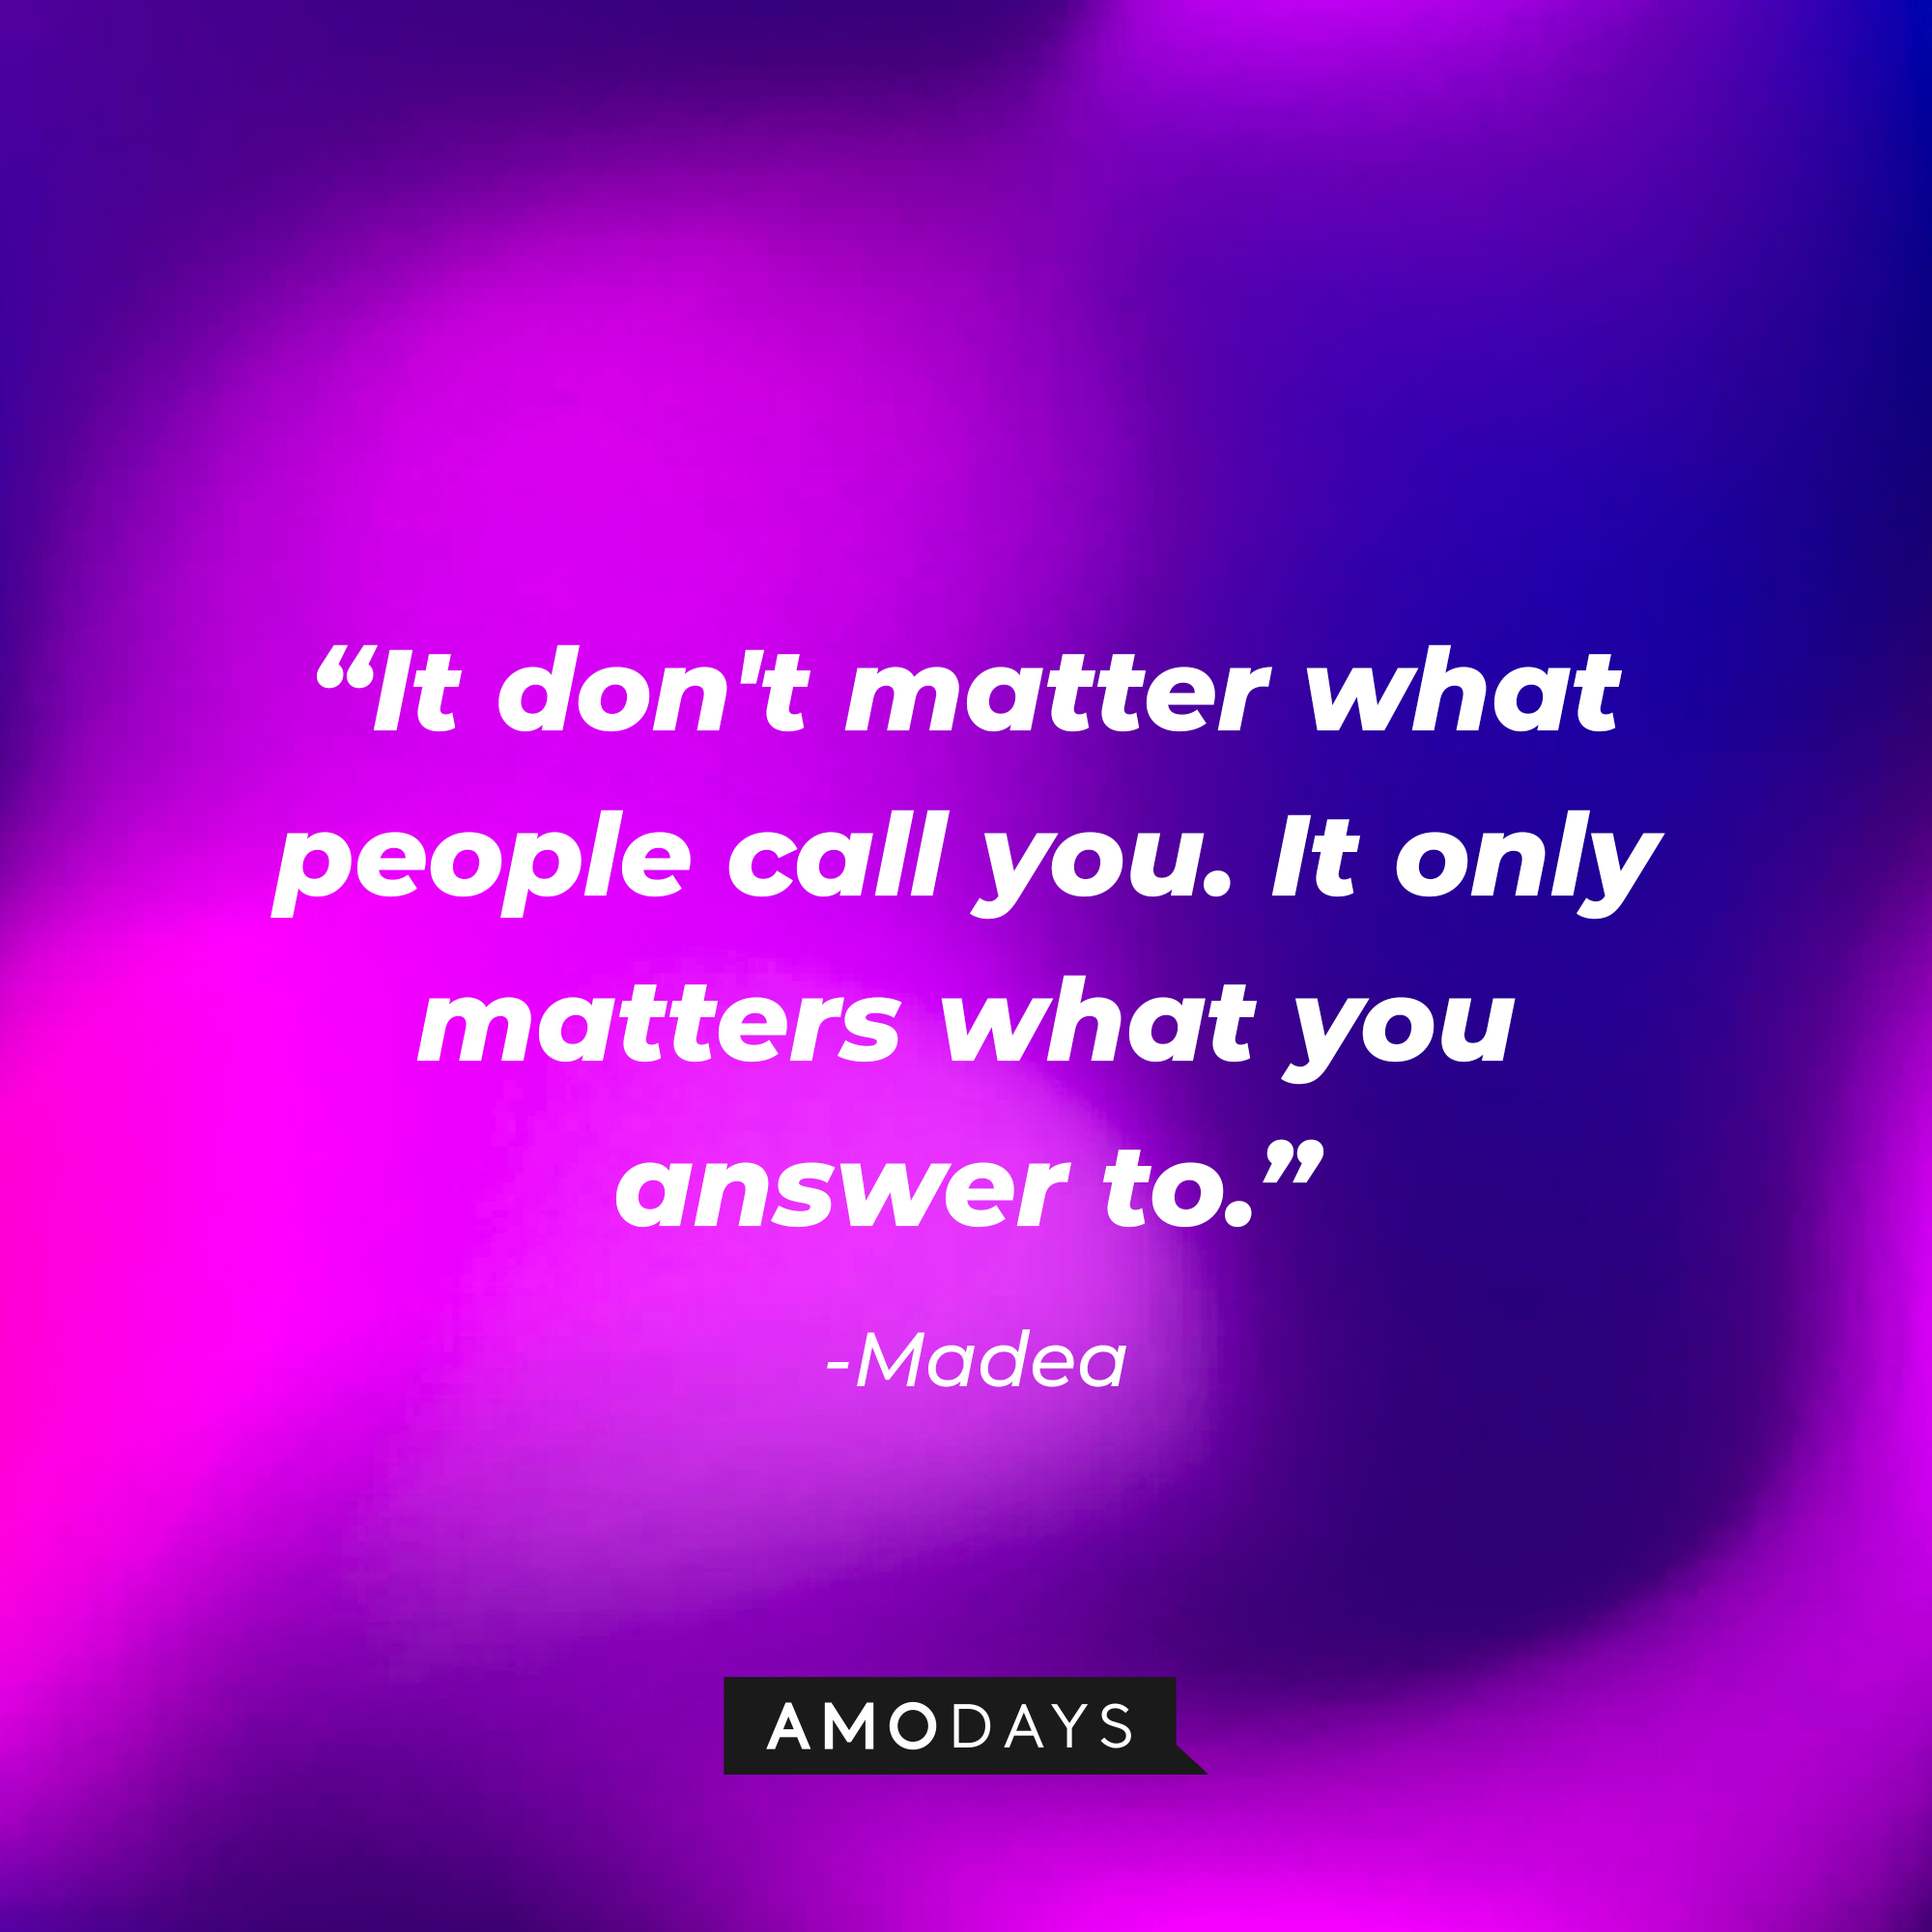 Madea’s quote: "It don't matter what people call you. It only matters what you answer to." | Source: AmoDays